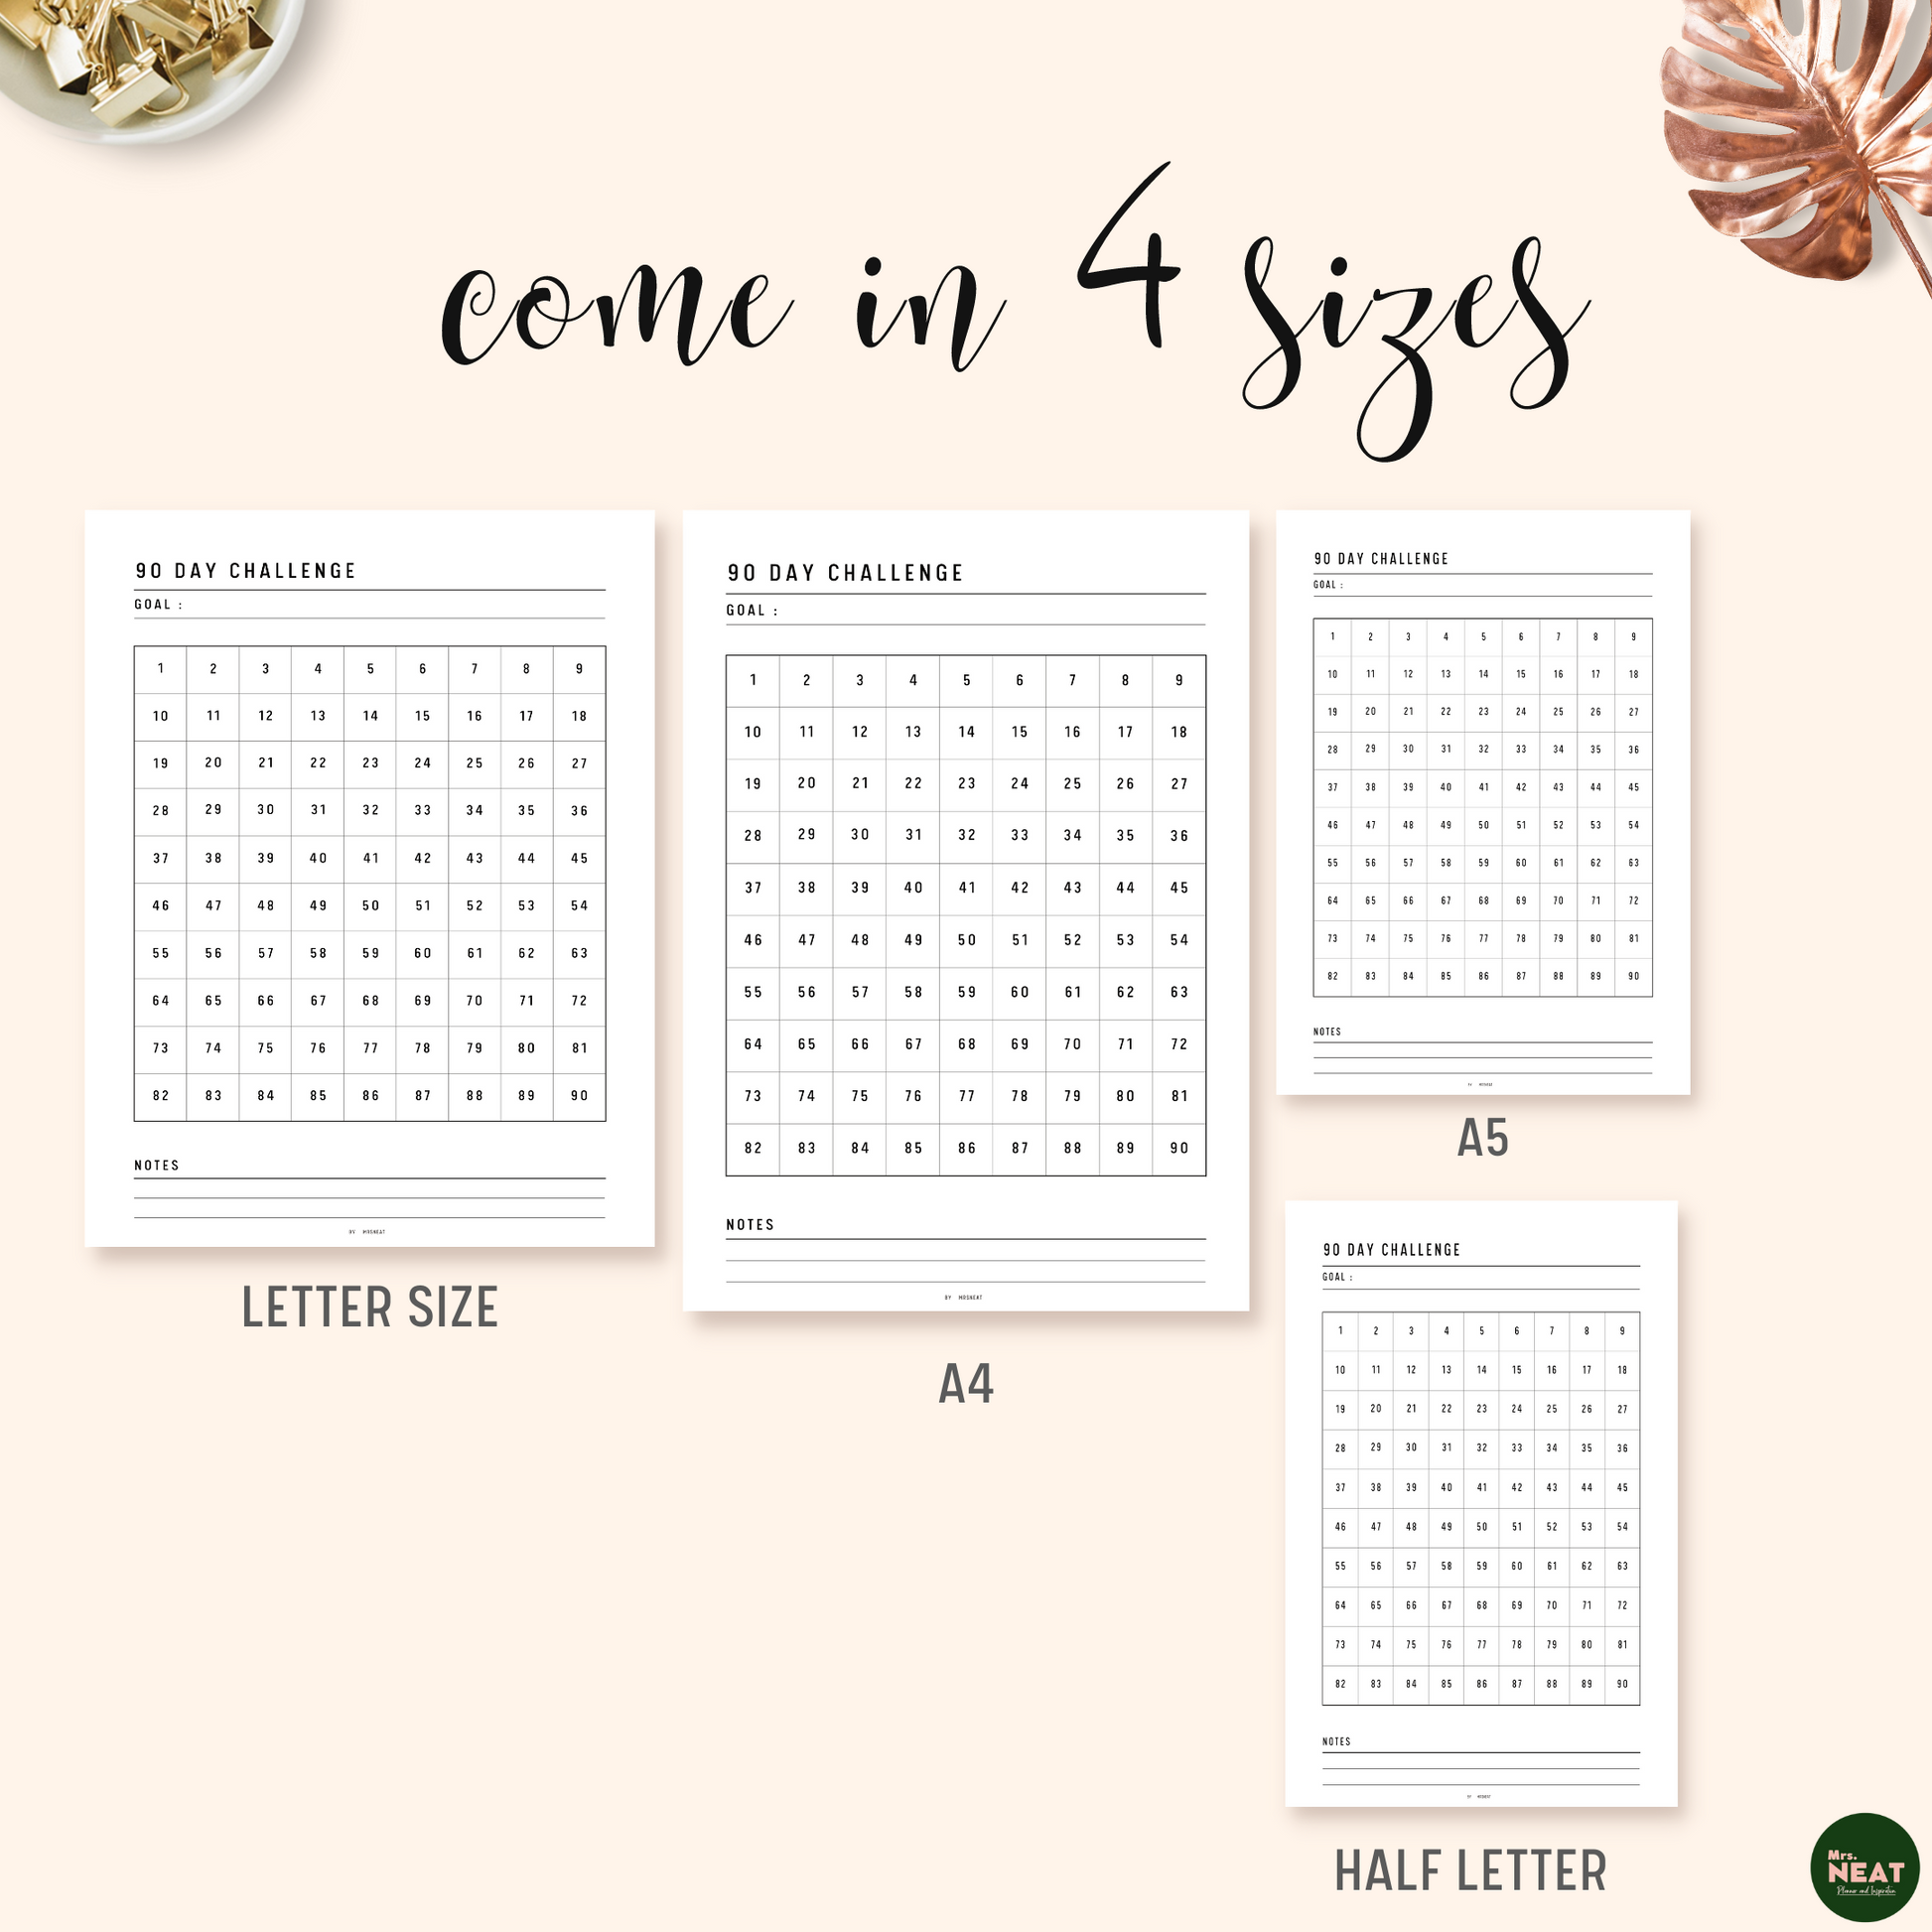 90 Day Challenge Habit Tracker Printable Planner in A4, A5, Letter and Half Letter size